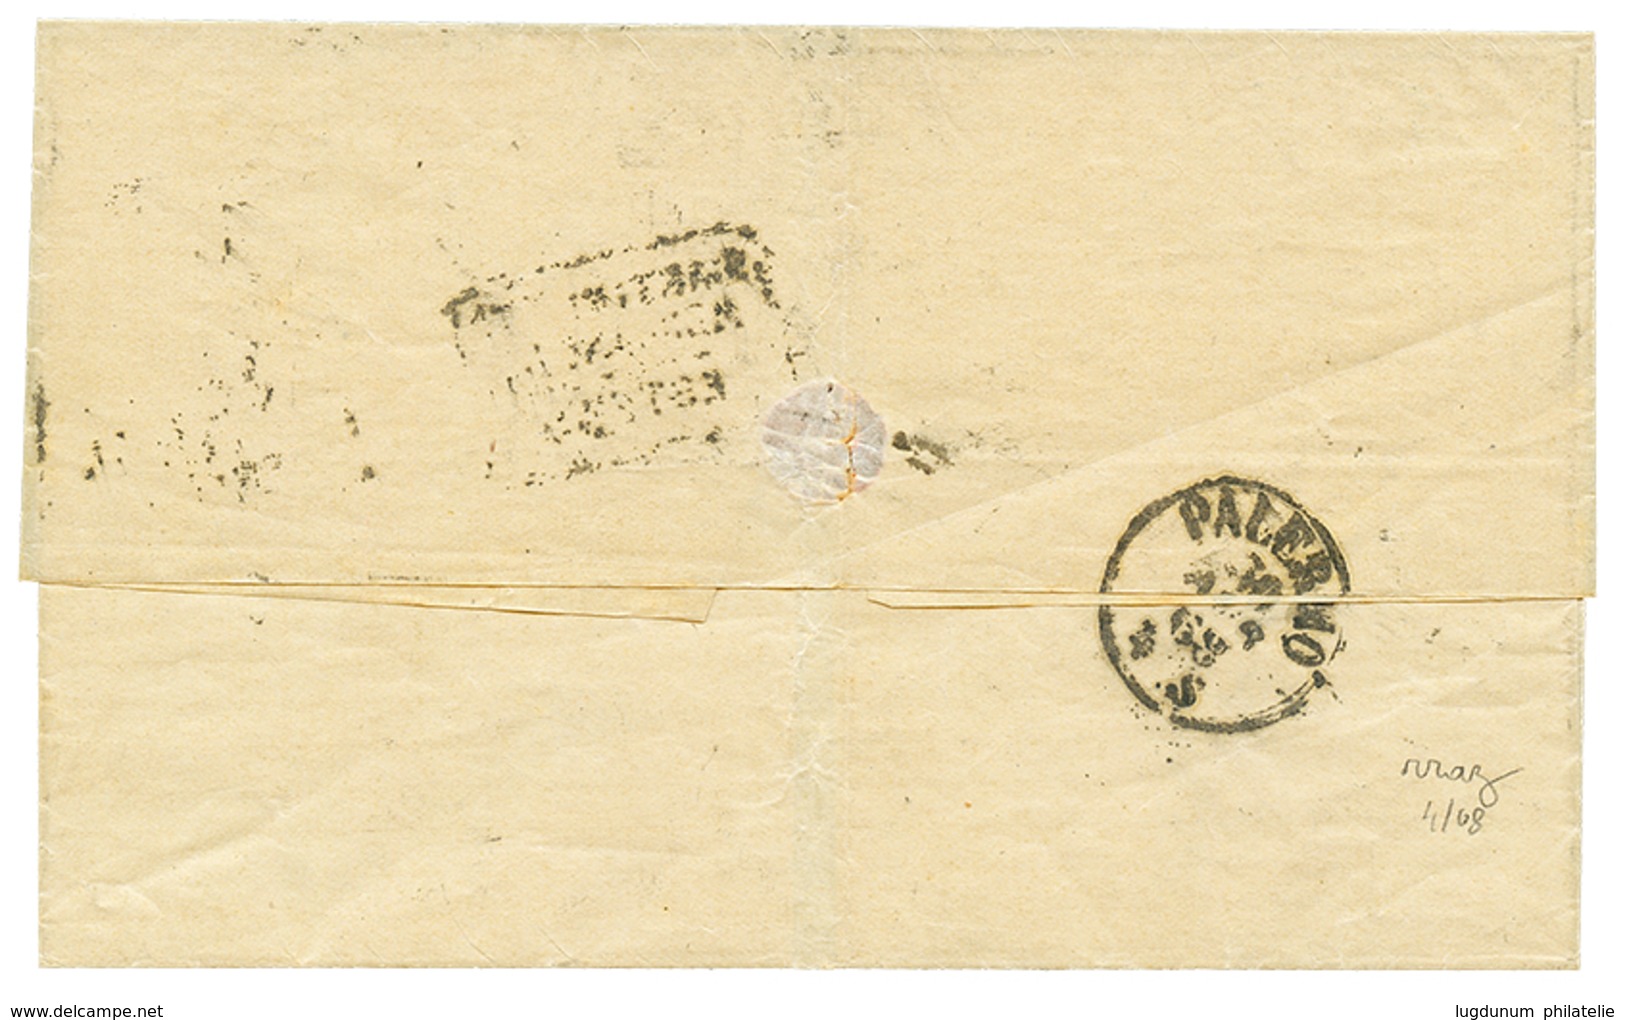 1178 1868 FRANCE 40c Canc. Boxed Cachet "22" On Cover From MARSEILLE To PALERMO ( SICILY ). Signed CALVES. GREAT RARITY. - Non Classés